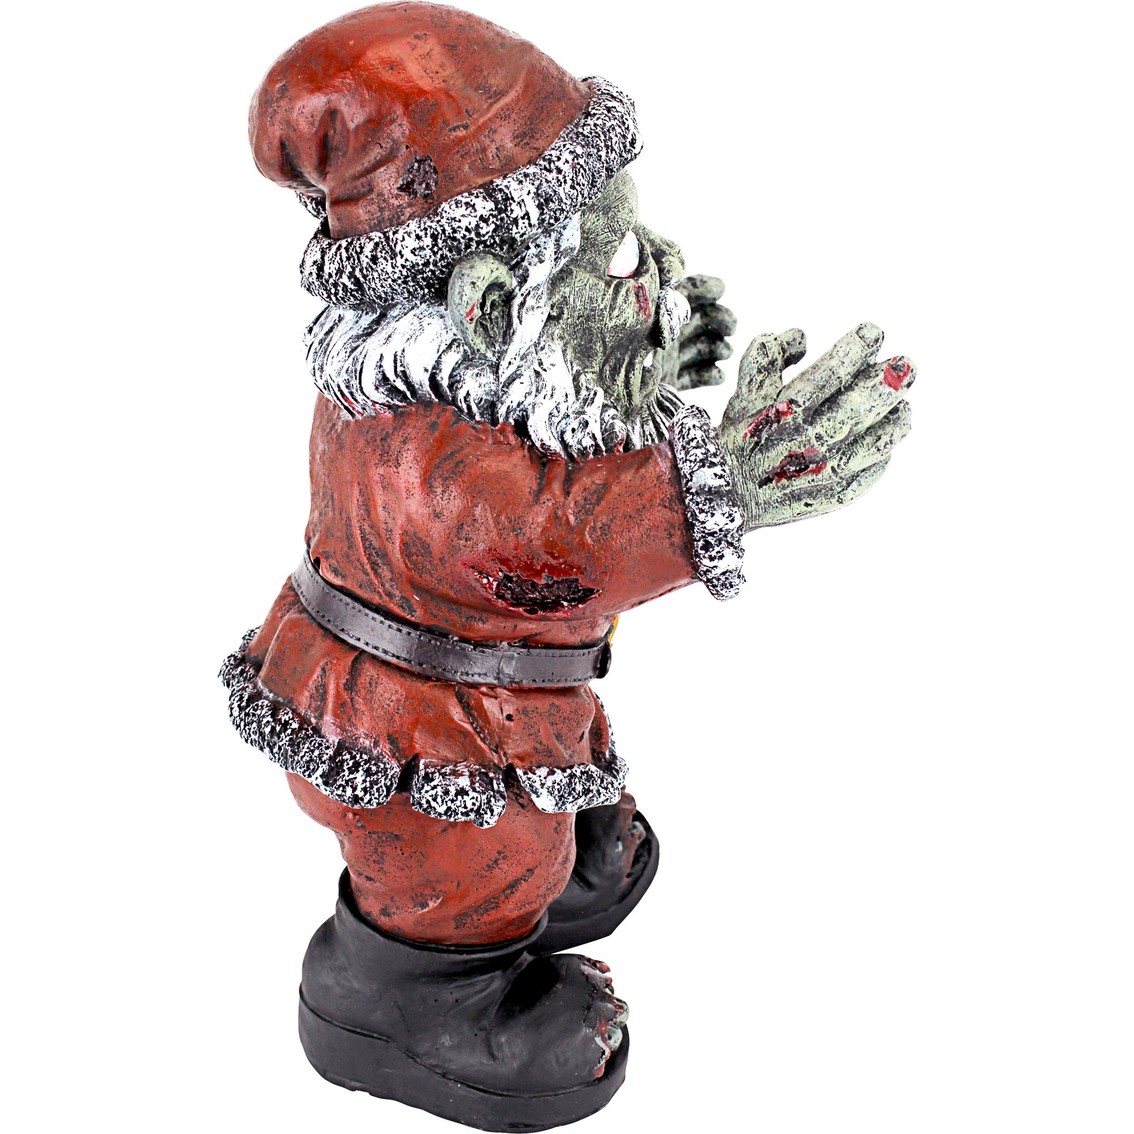 Design Toscano Zombie Claus Holiday Statue - Image 2 of 4